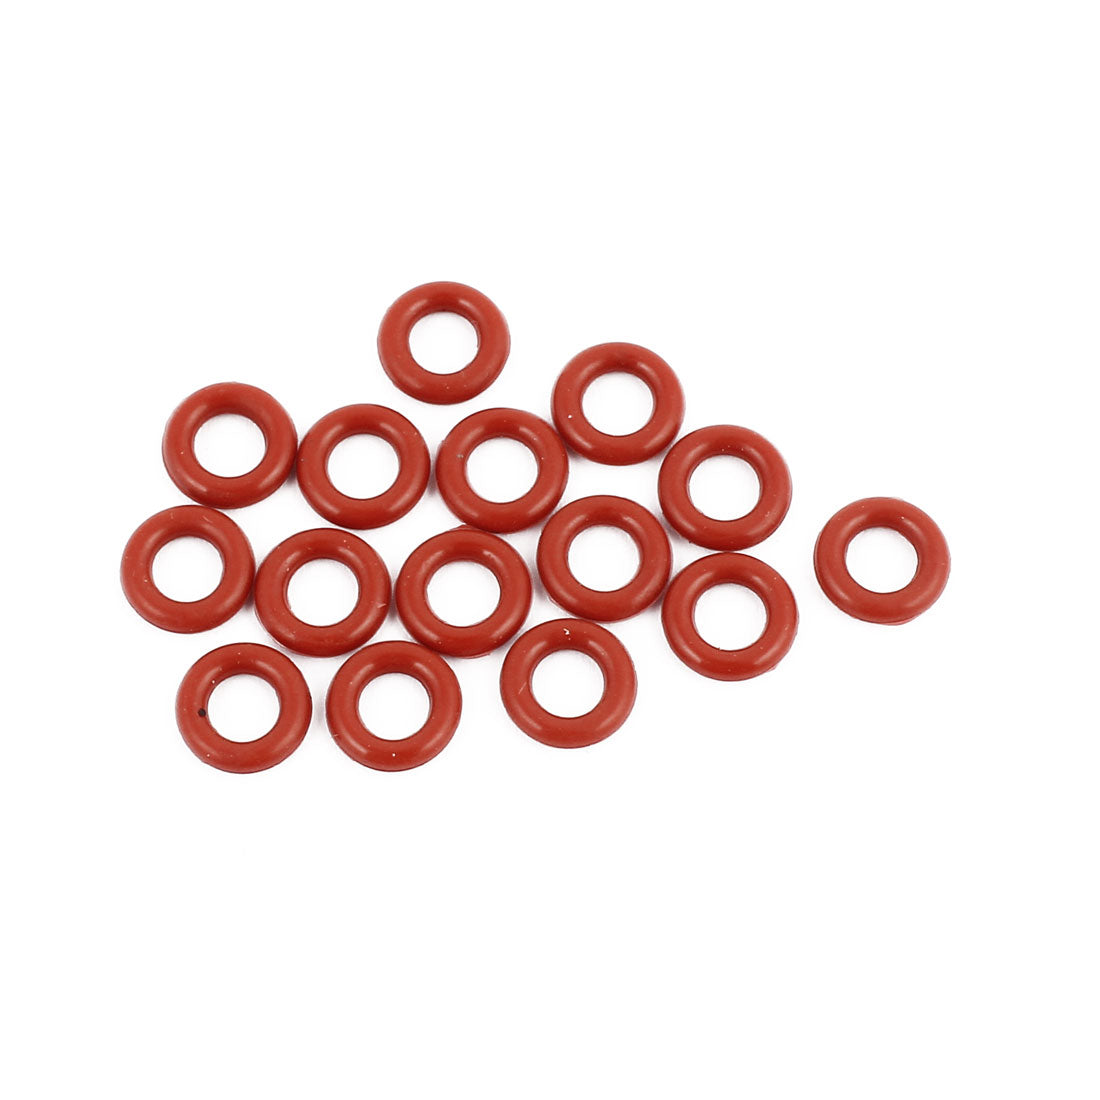 uxcell Uxcell 15pcs 8mmx1.9mm Heat Resistant Silicone O Ring Oil Sealing Ring Gasket Red